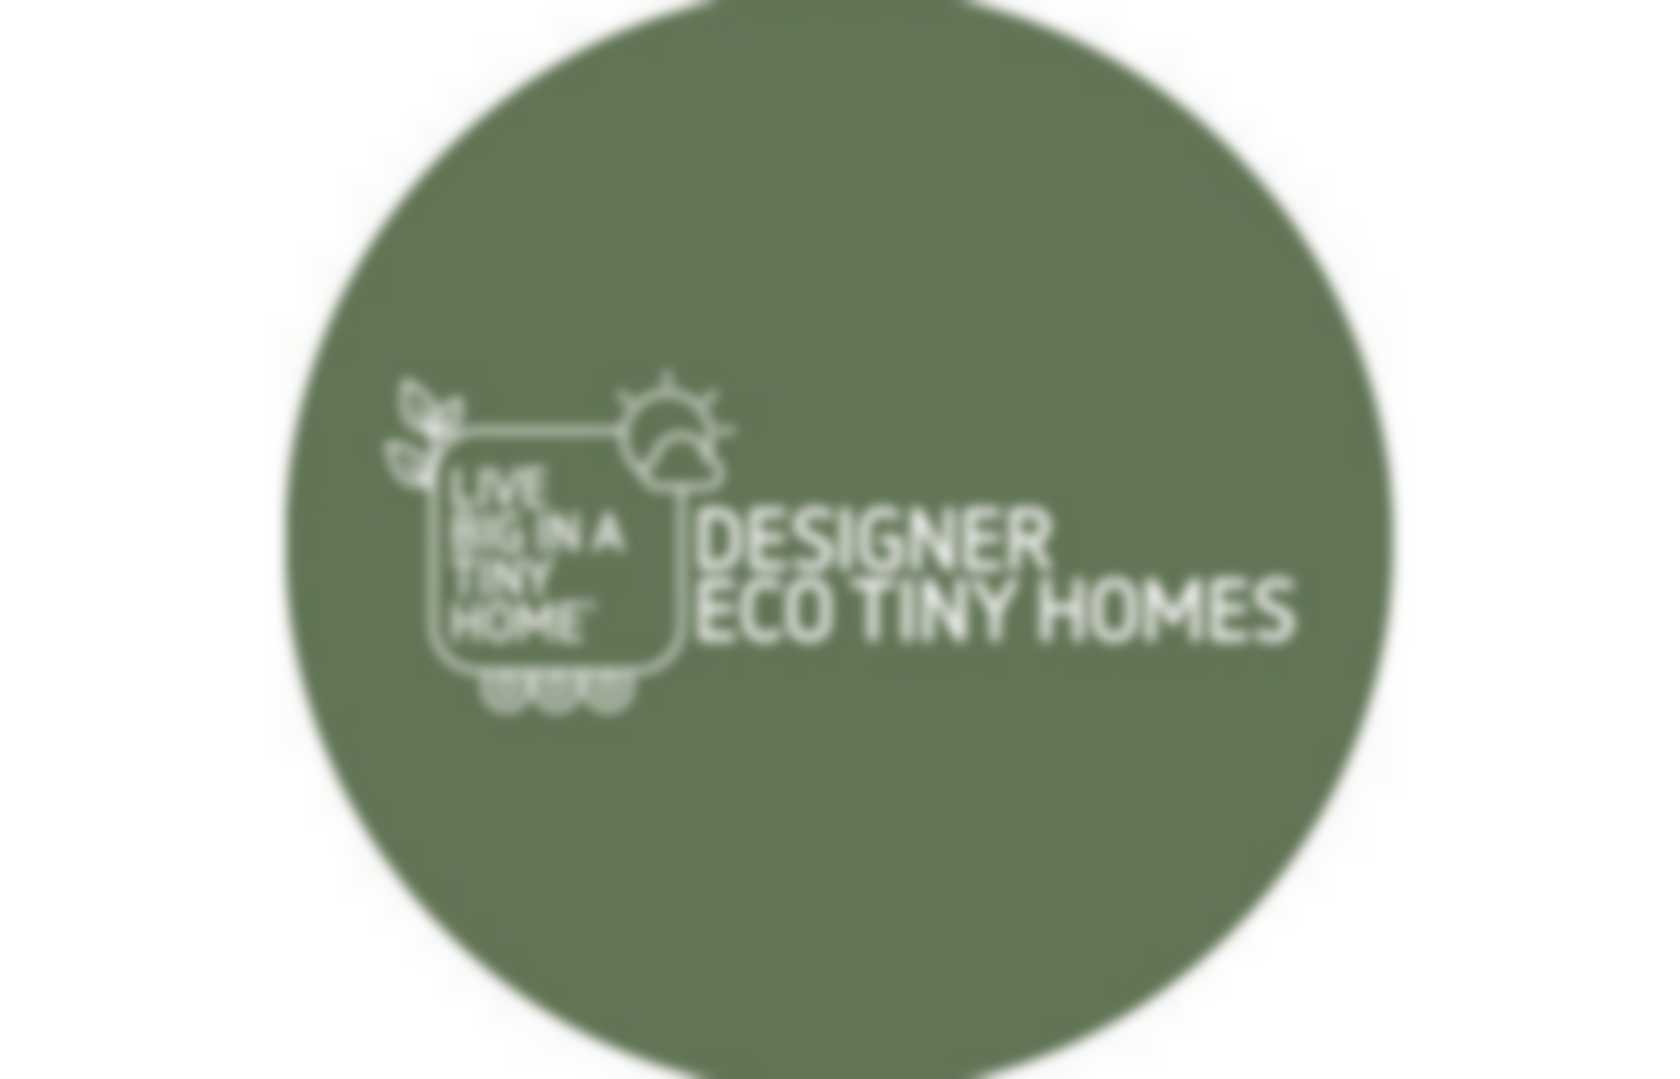 Australian tiny houses - Designer Eco Tiny Homes is now listed on Tradie Centre